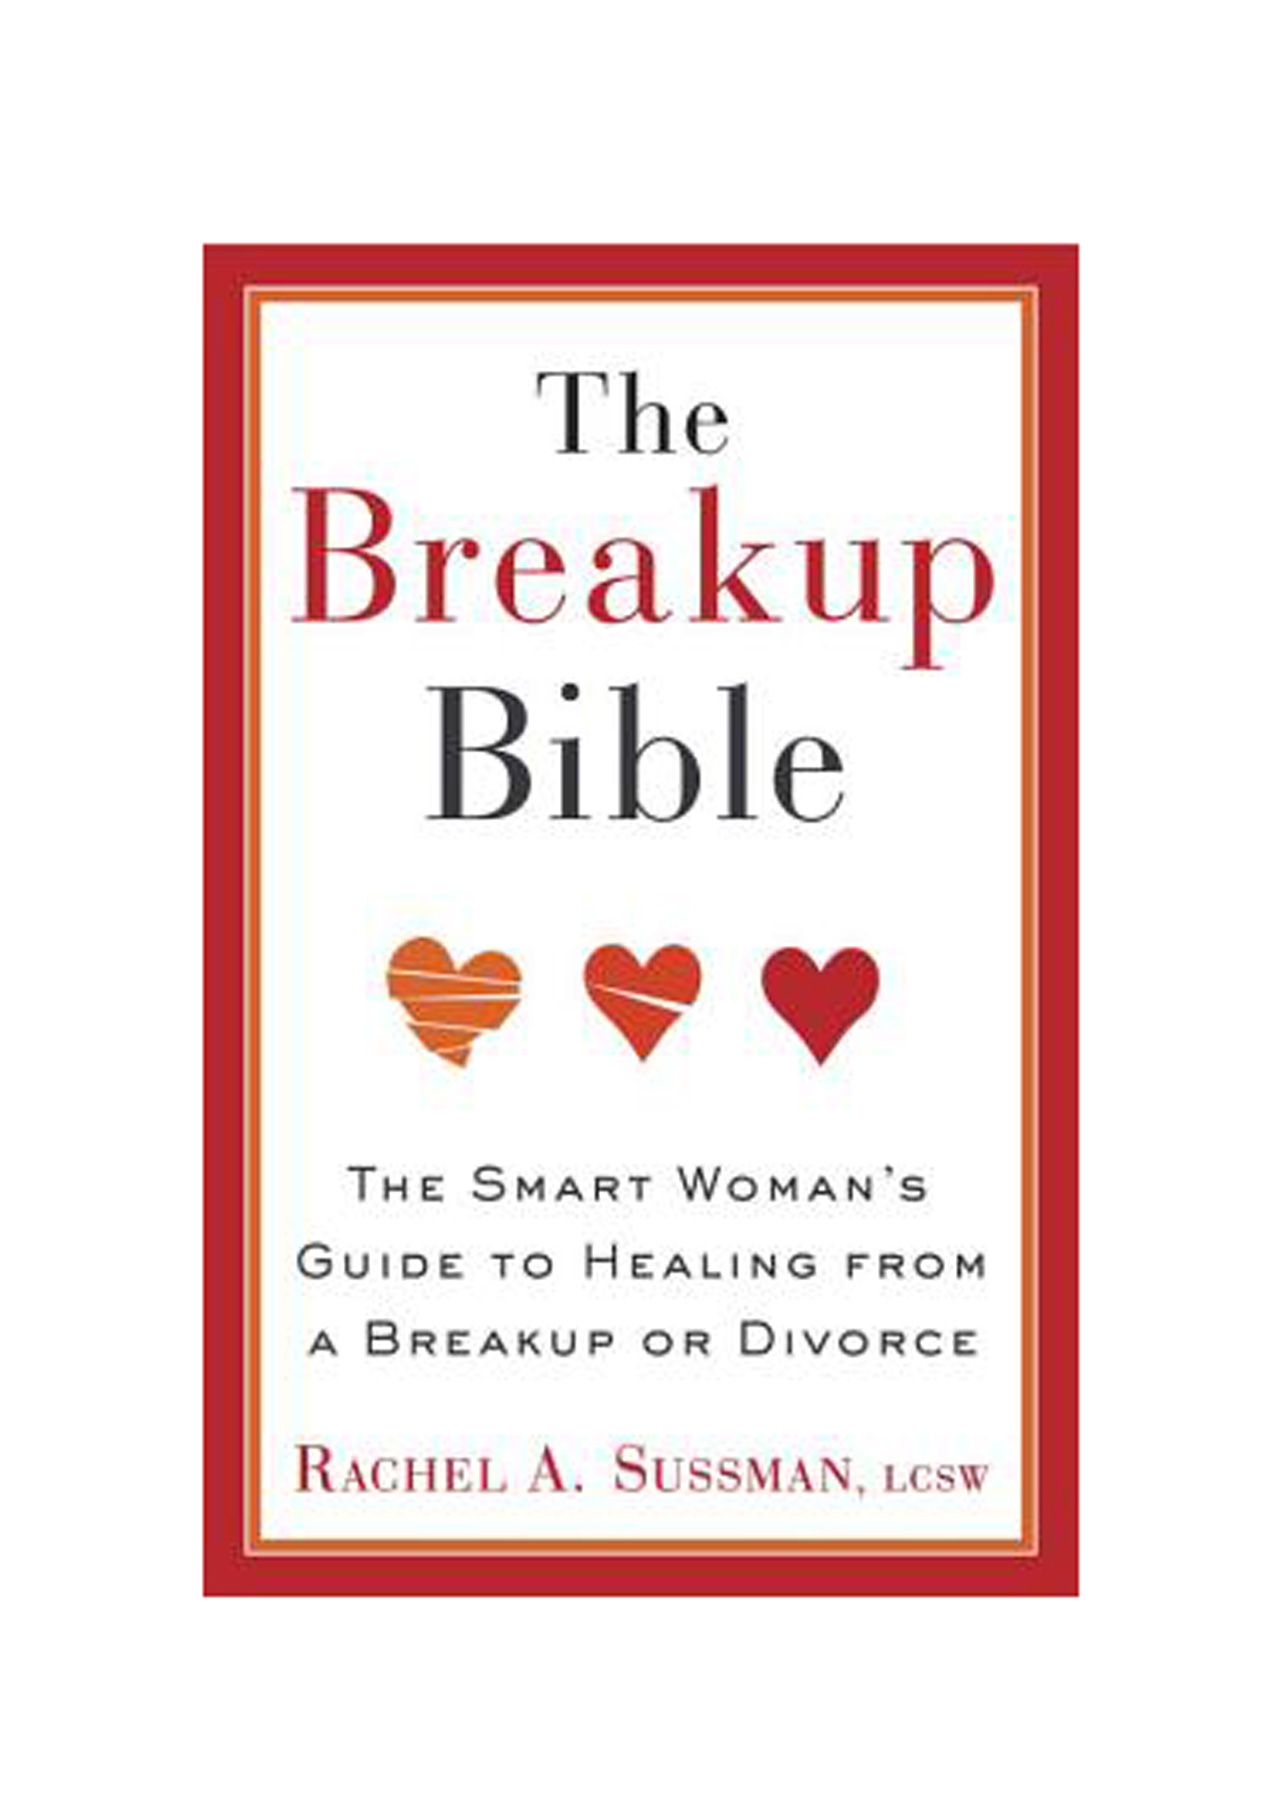 Books for Breakups: The Breakup Bible: The Smart Woman’s Guide to Healing from a Breakup or Divorce, από τη Rachel Sussman